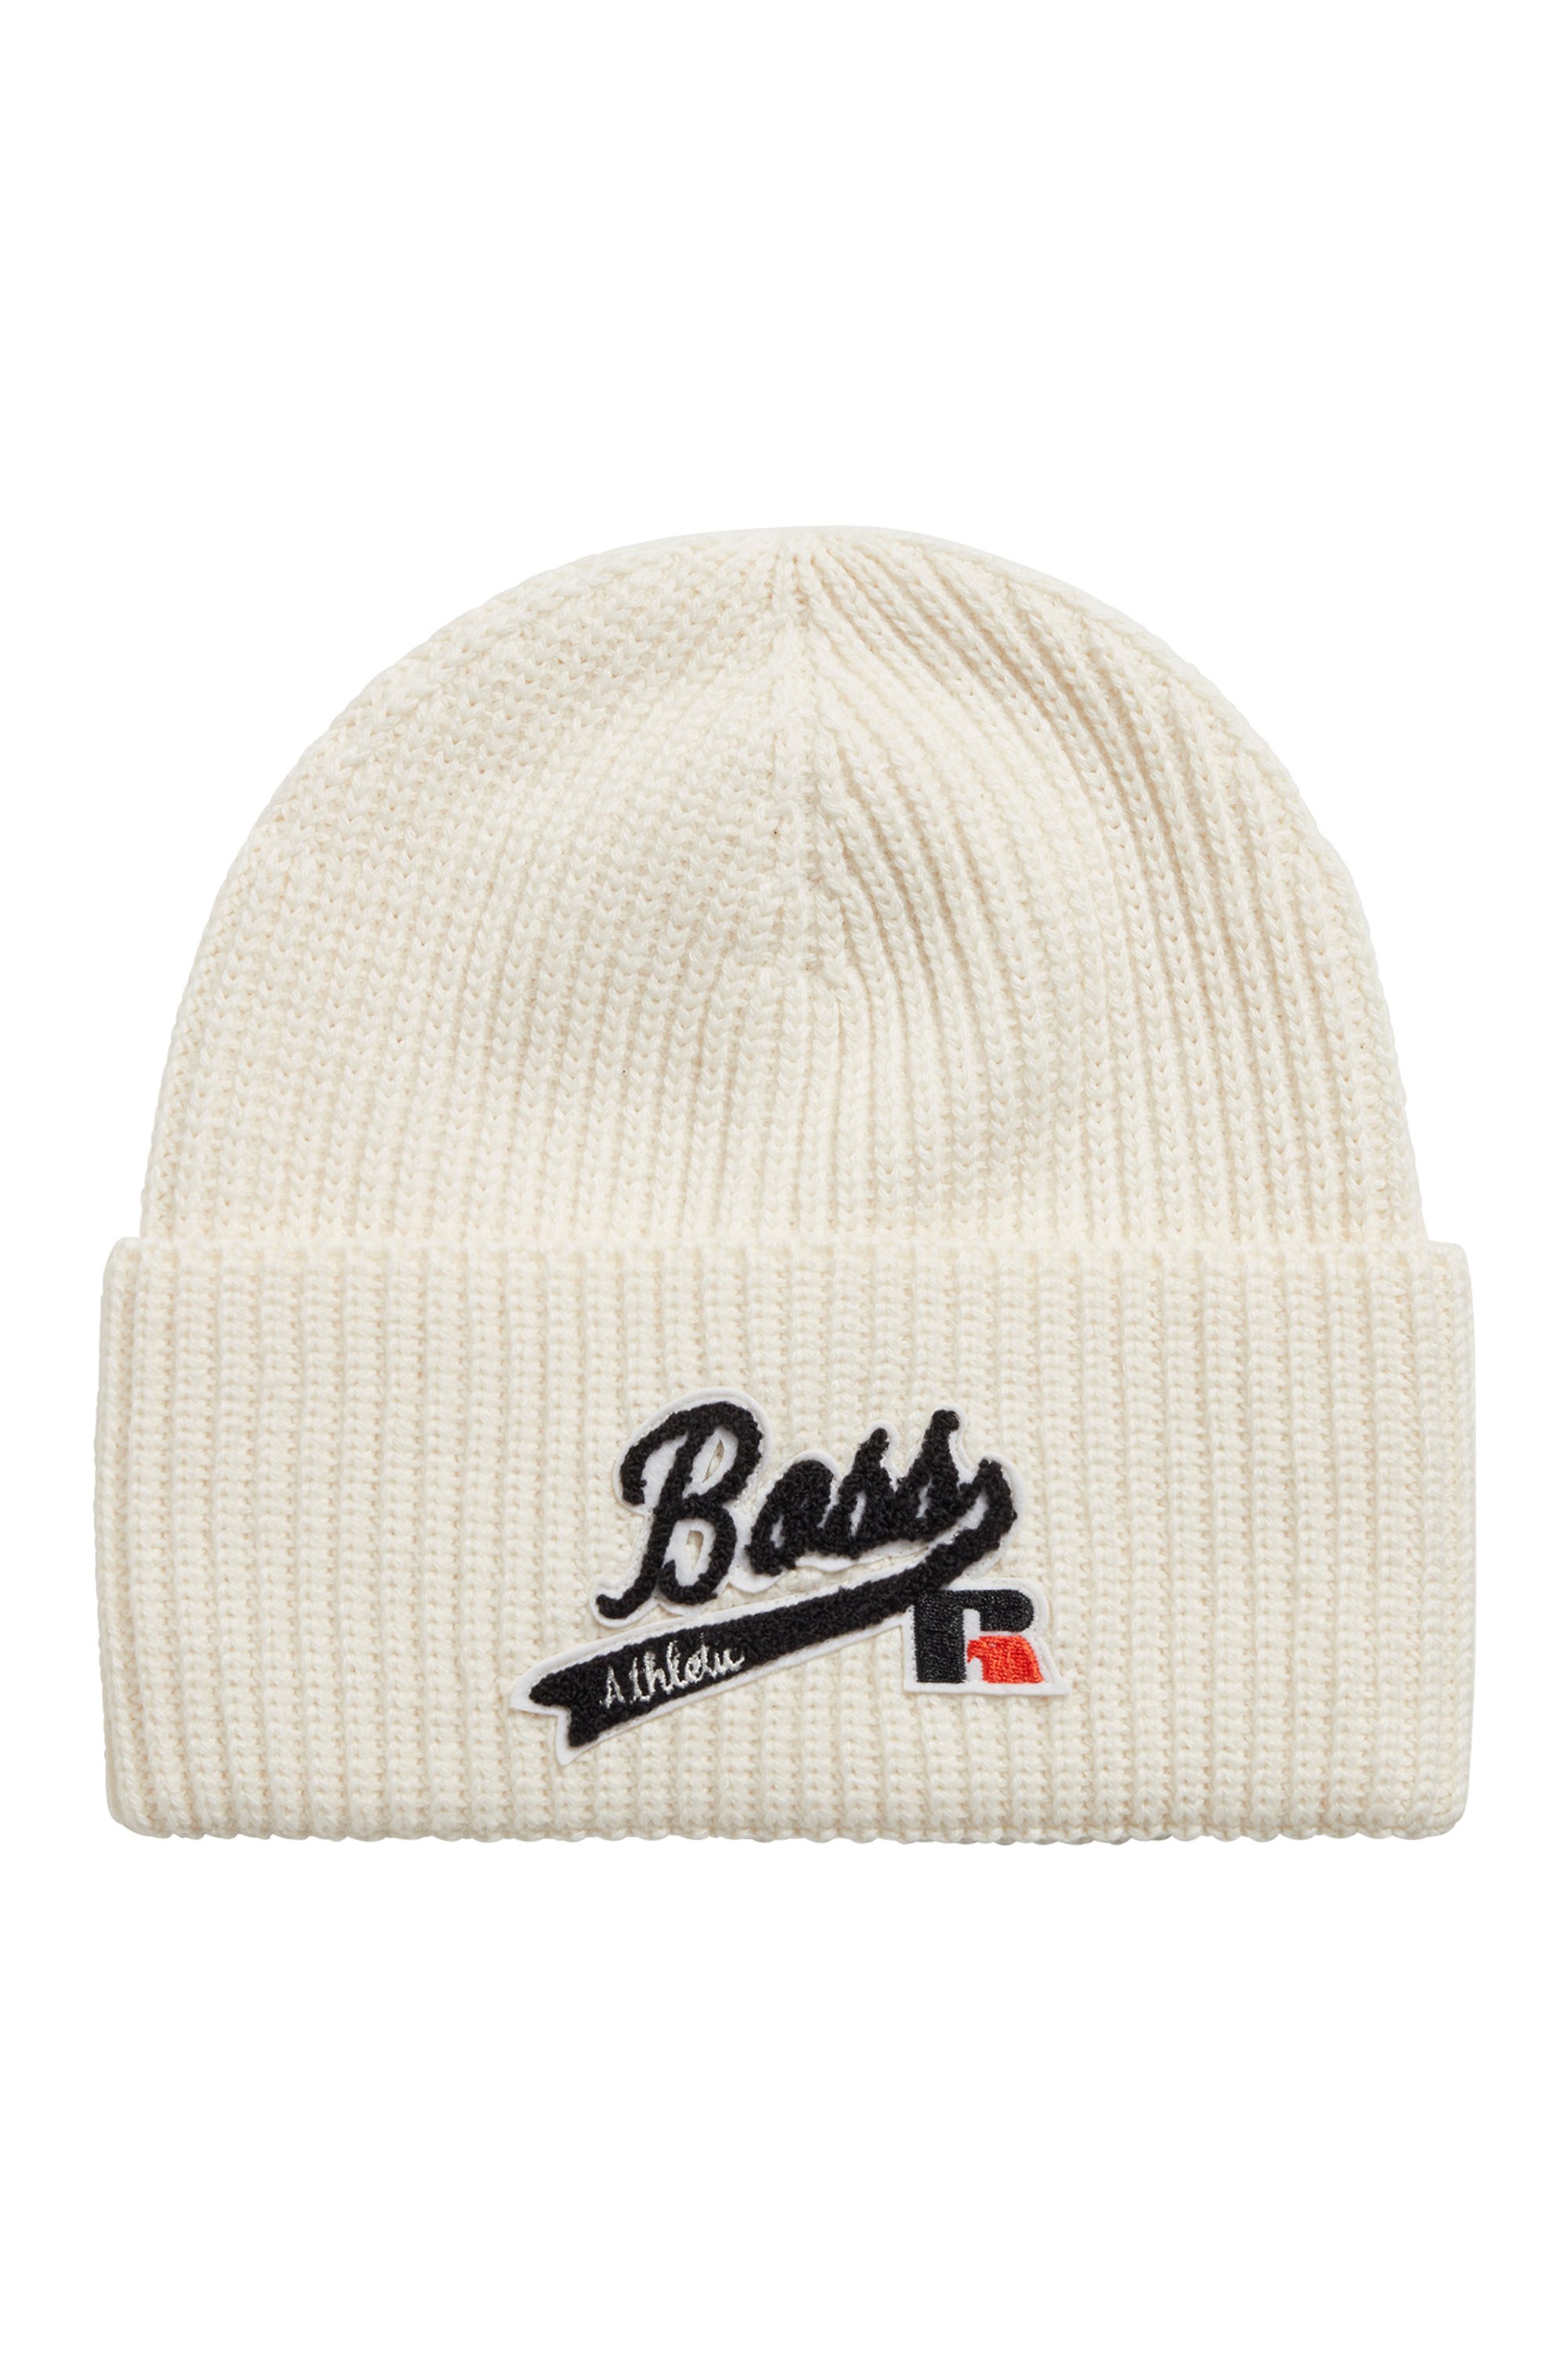 Knitted beanie hat with embroidered logo patch, White